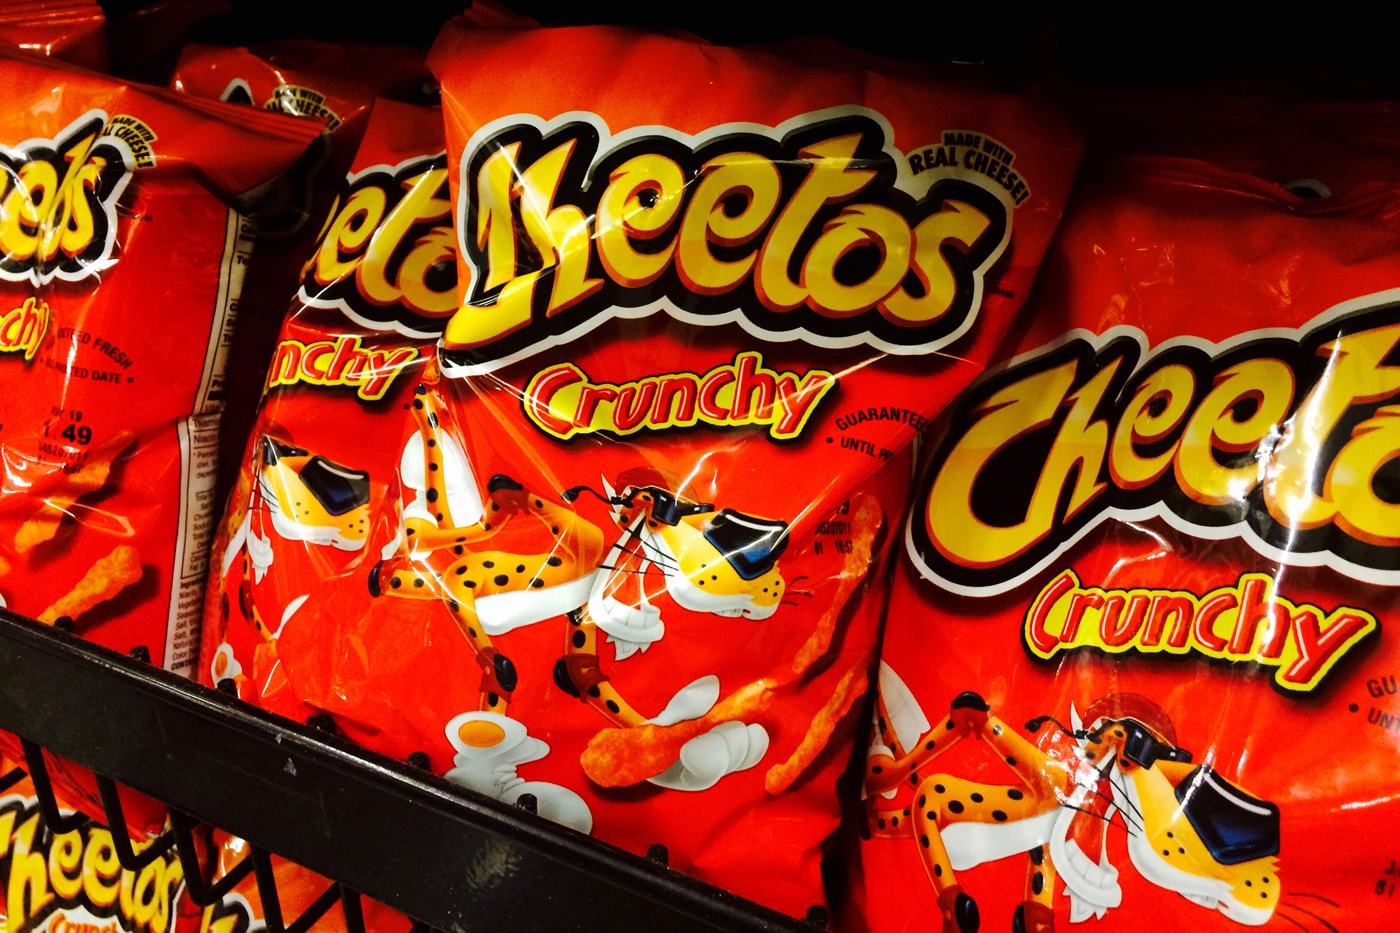 Cheetos cheese dust has an official name and it sounds strange